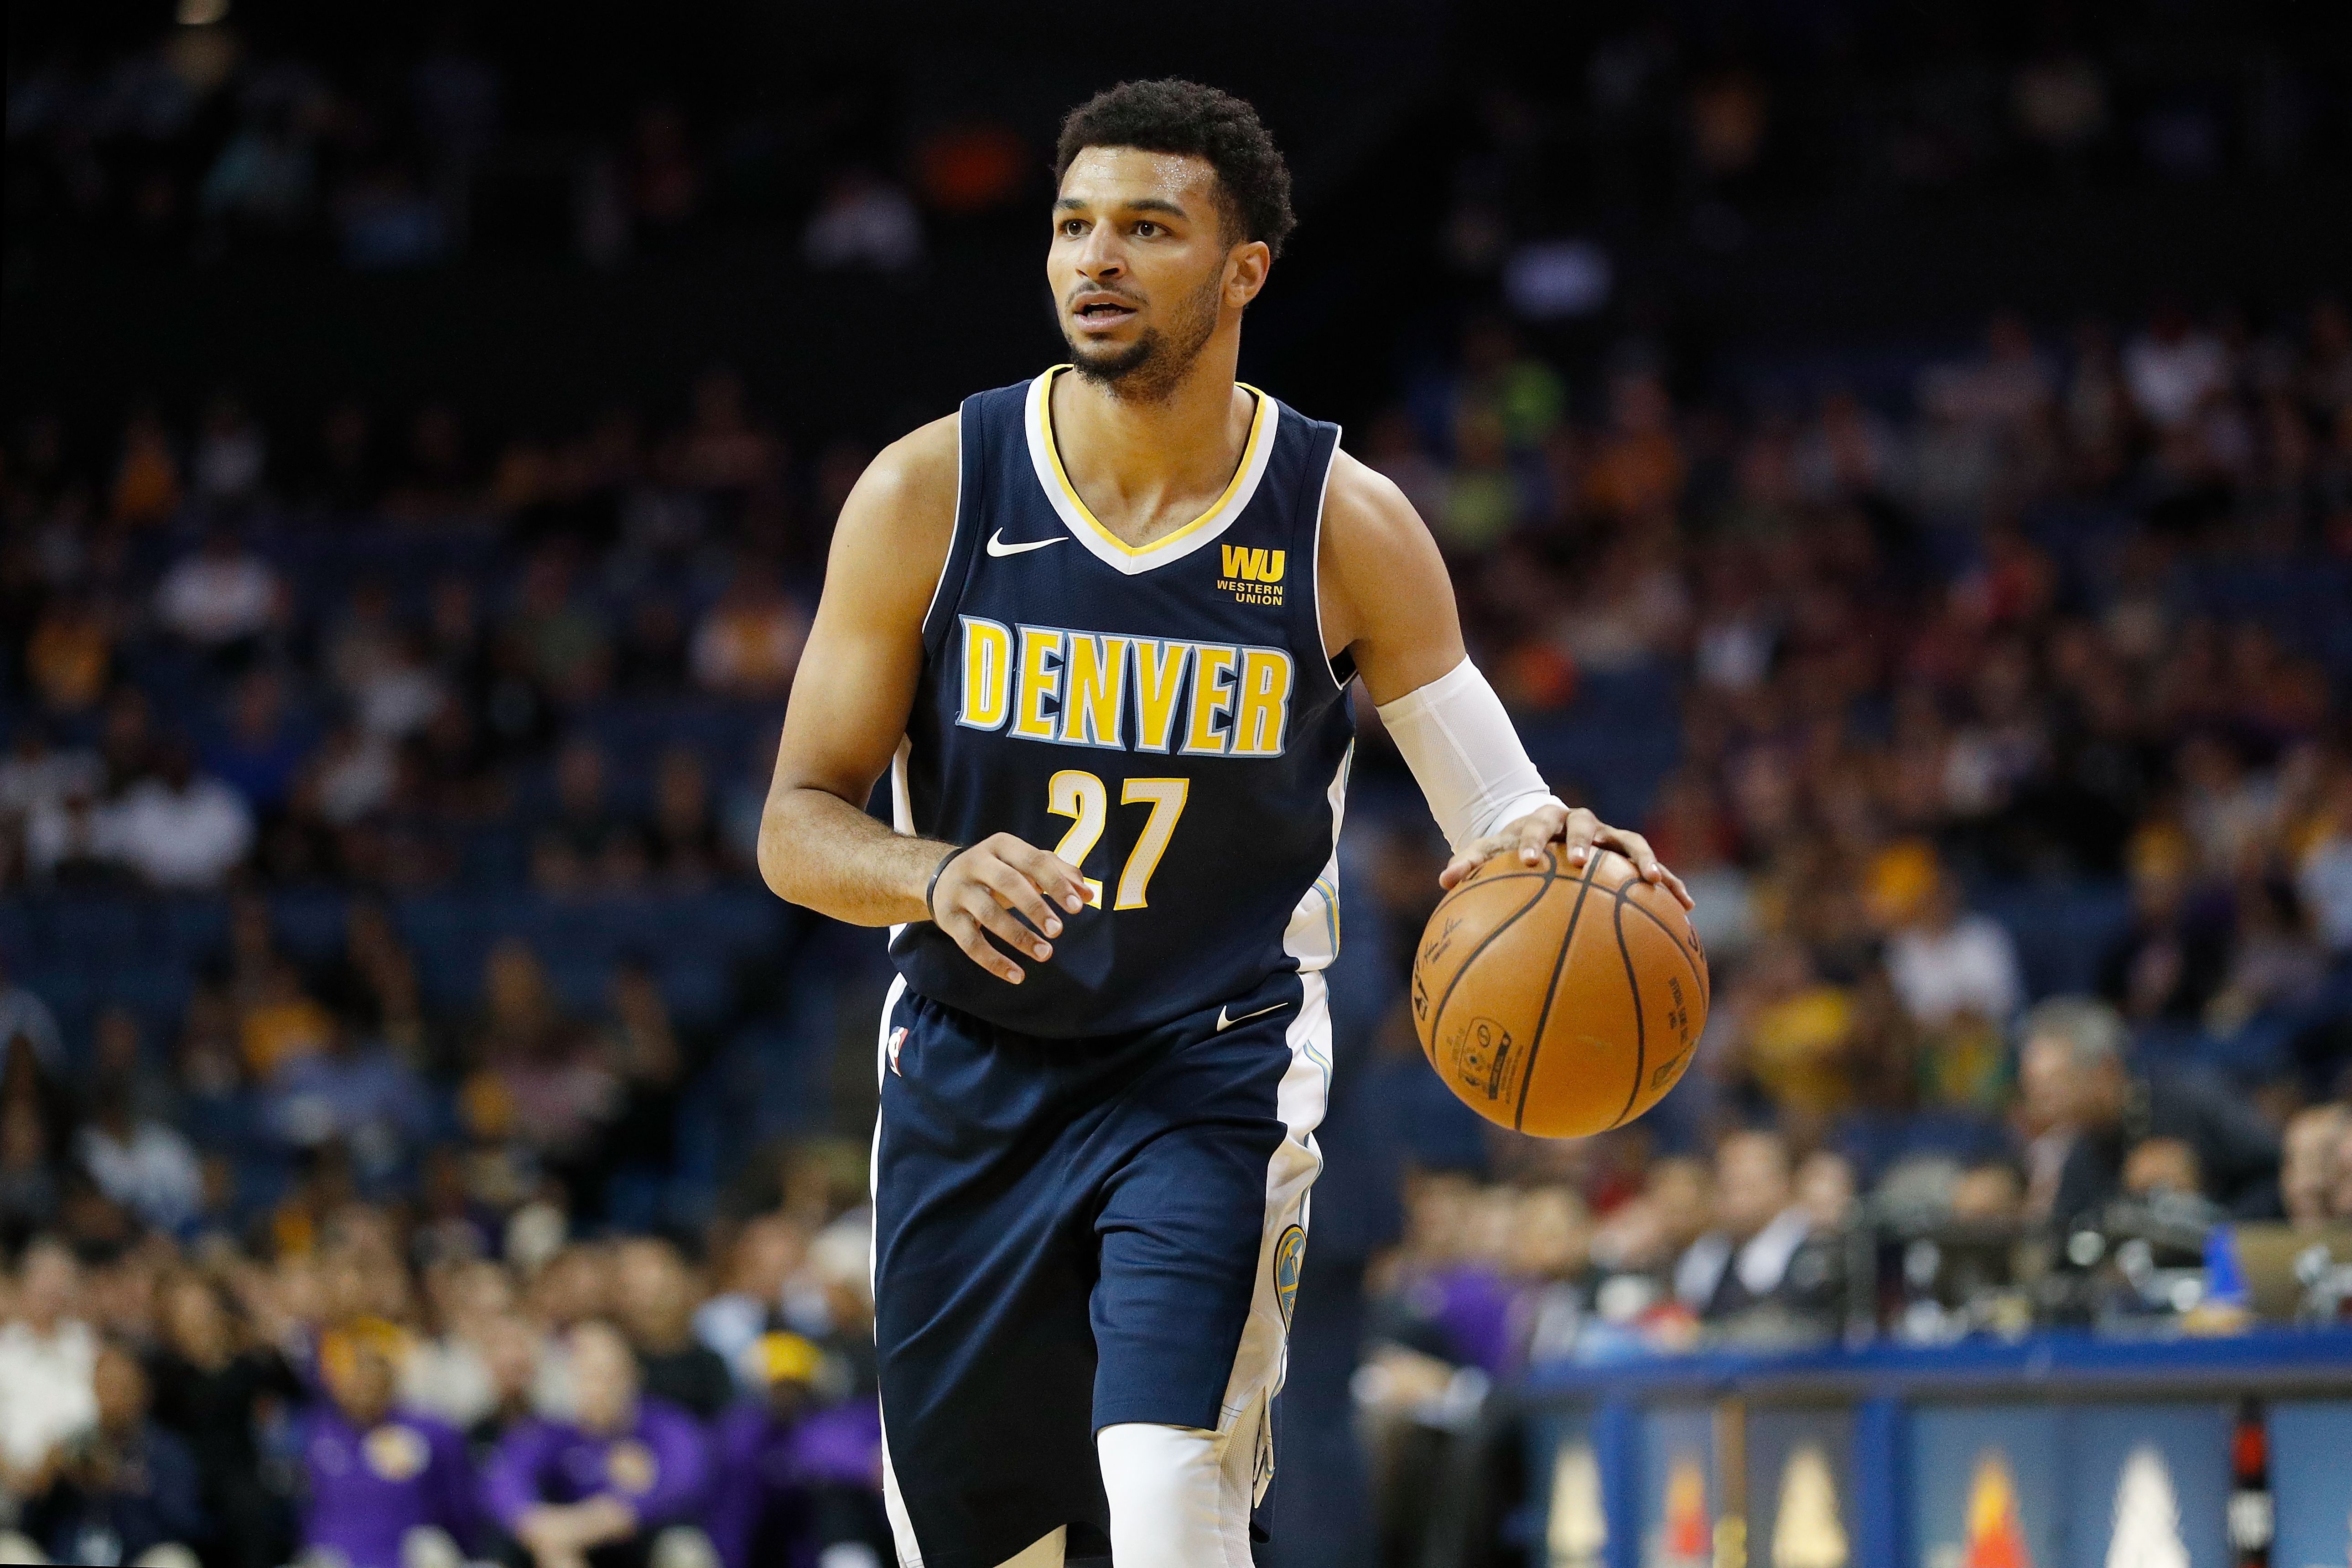 Denver Nuggets: Jamal Murray has been an early disappointment